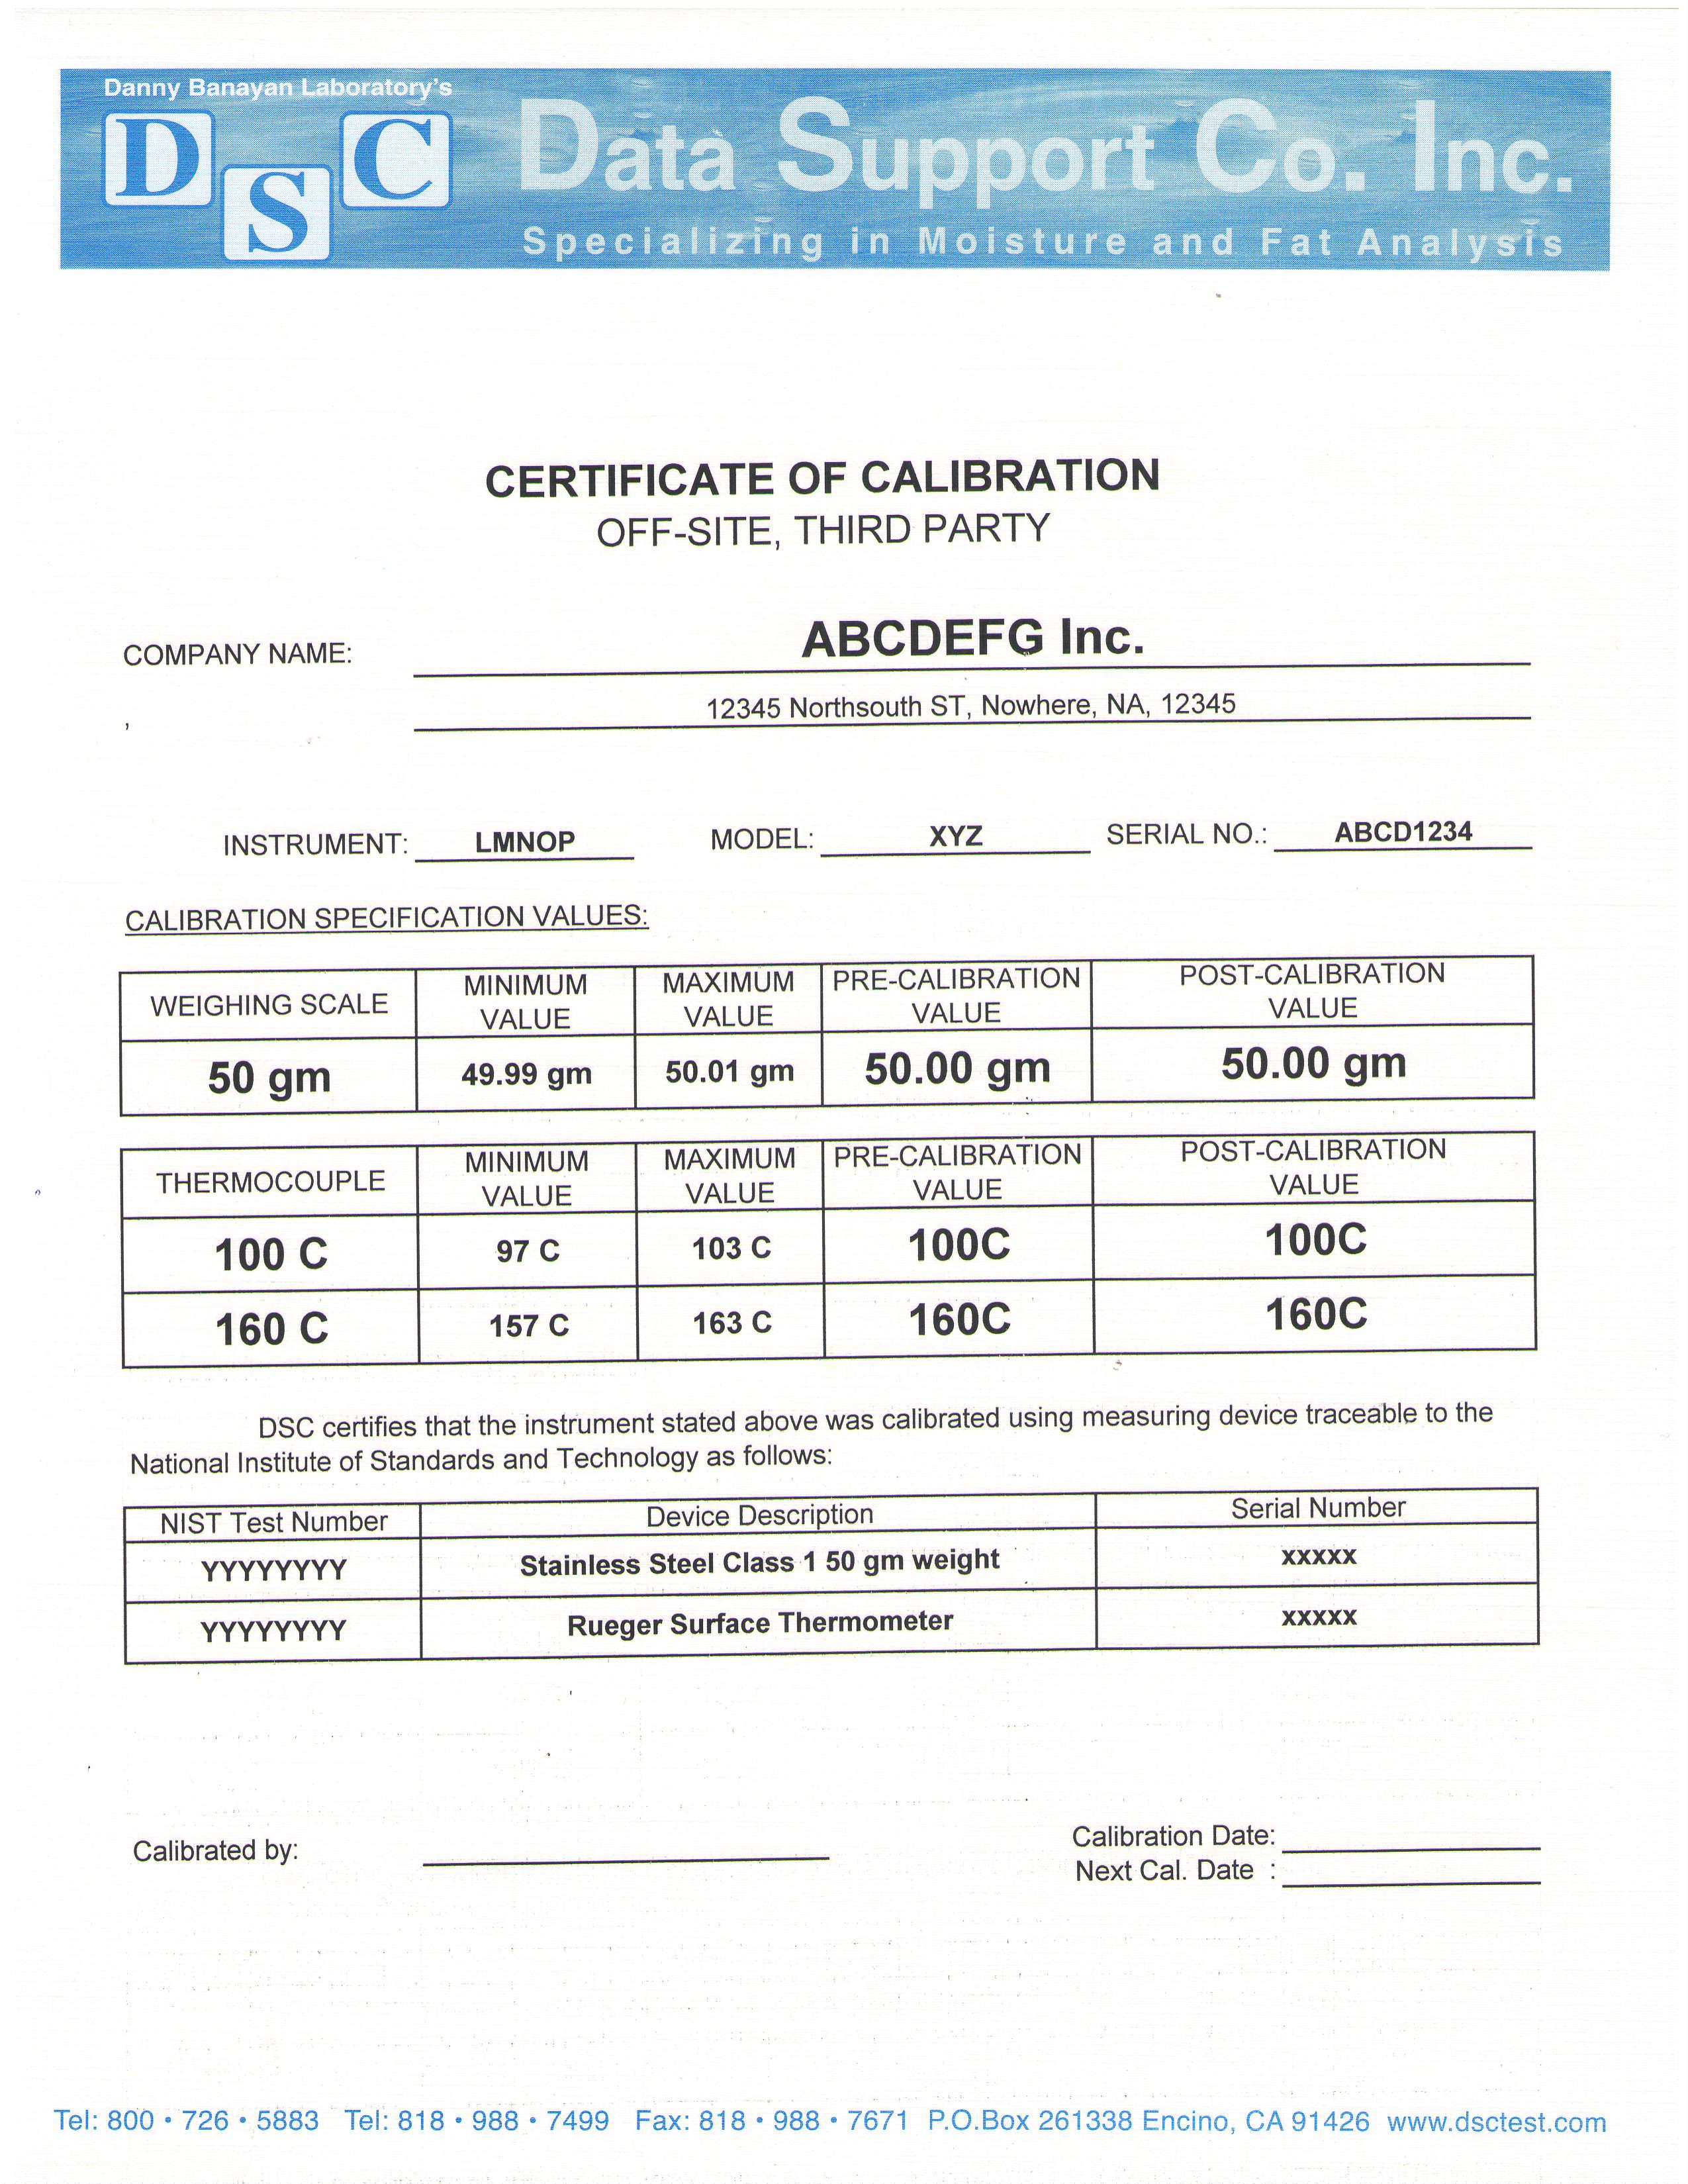 On-Purchase Certificate of Calibration